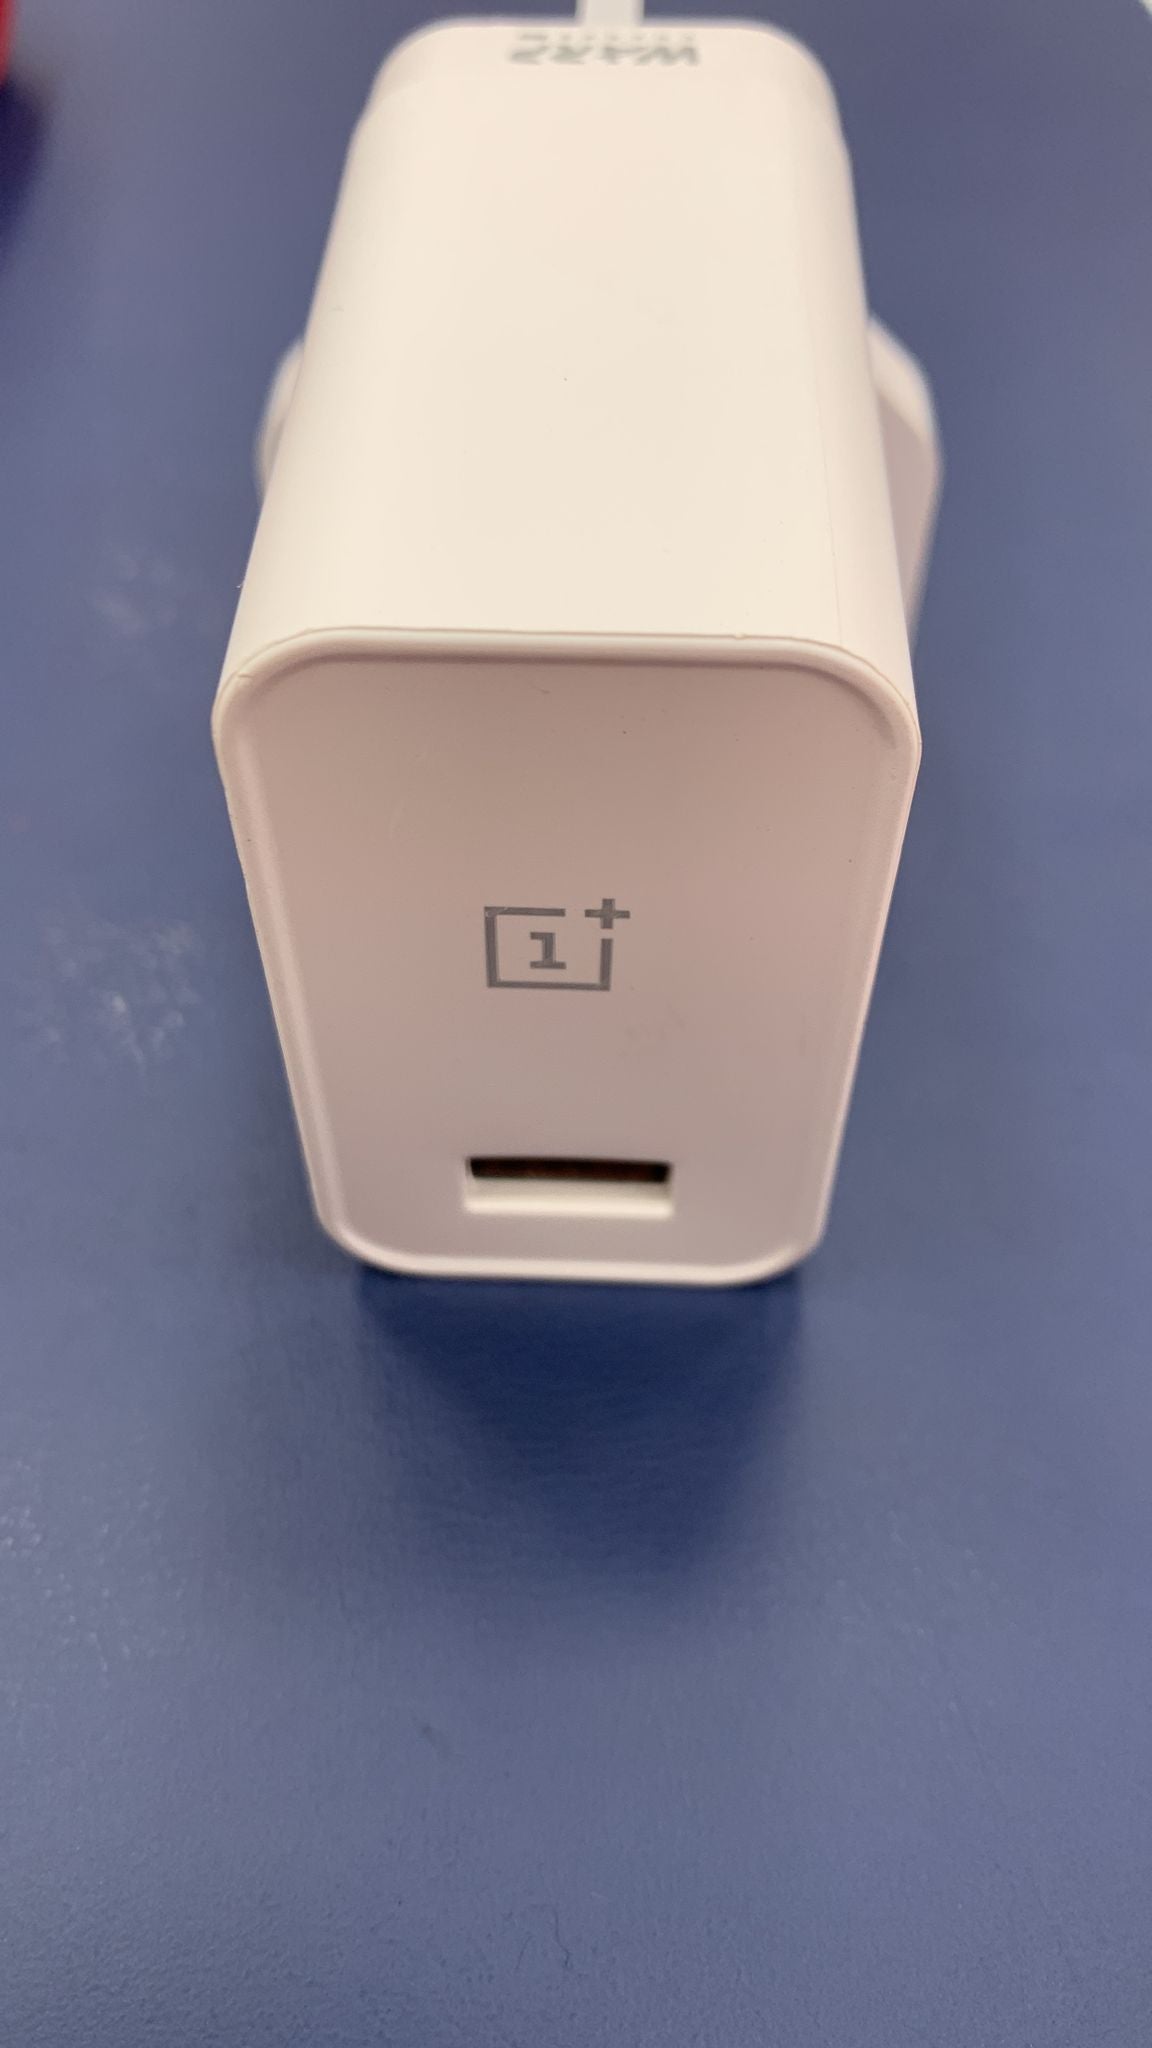 OnePlus USB 45W Wall Charger